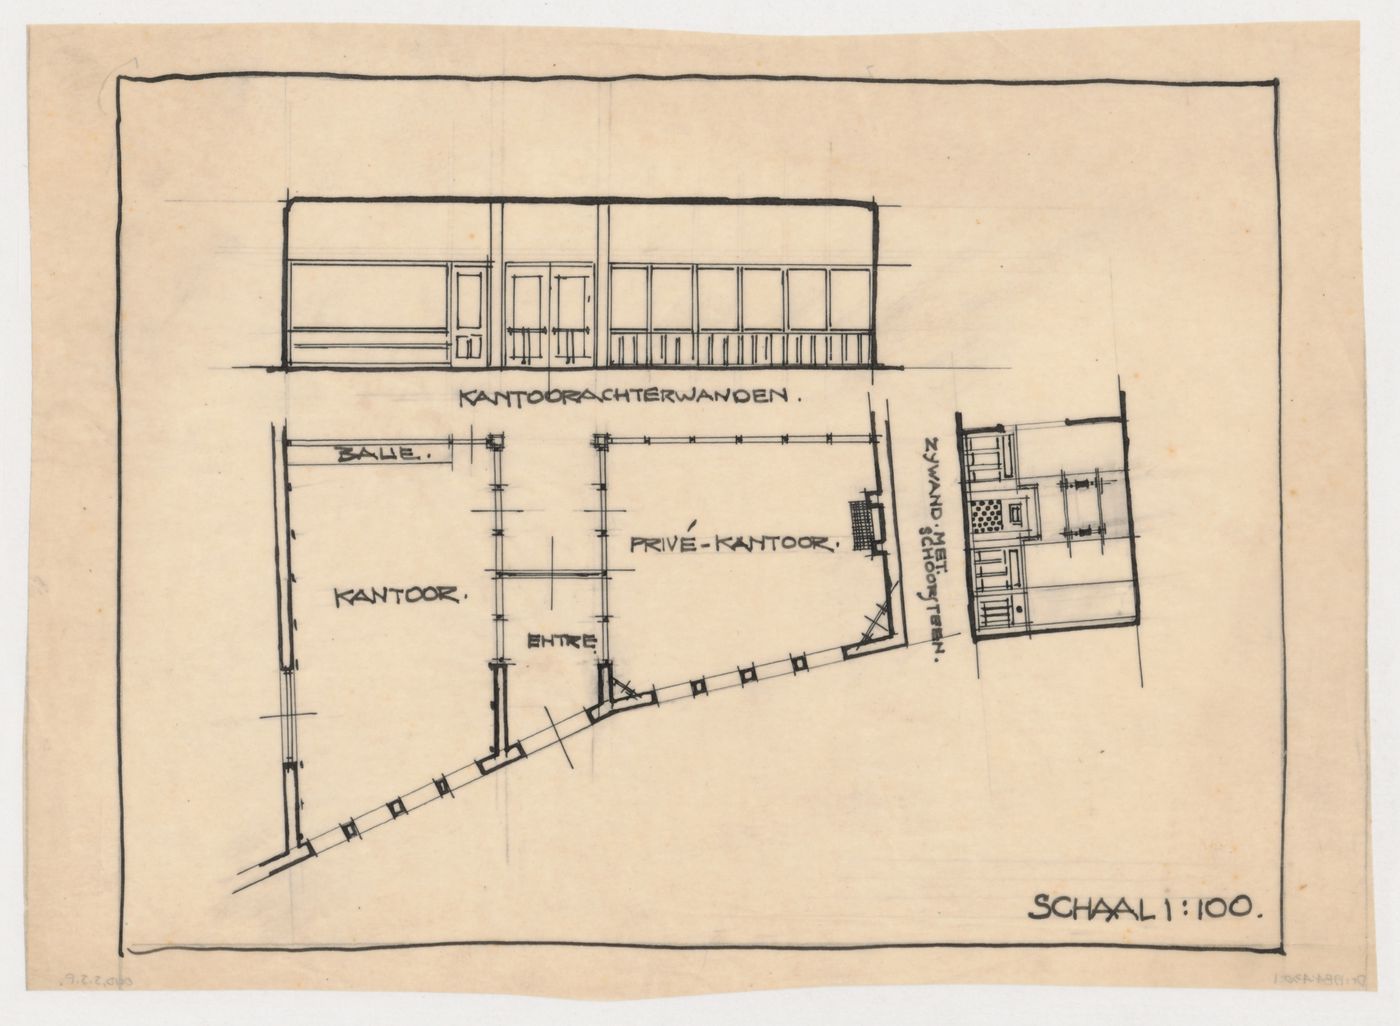 Plan and elevation for an office and elevation for a living room fireplace, possibly for Olveh mixed-use development, Rotterdam, Netherlands